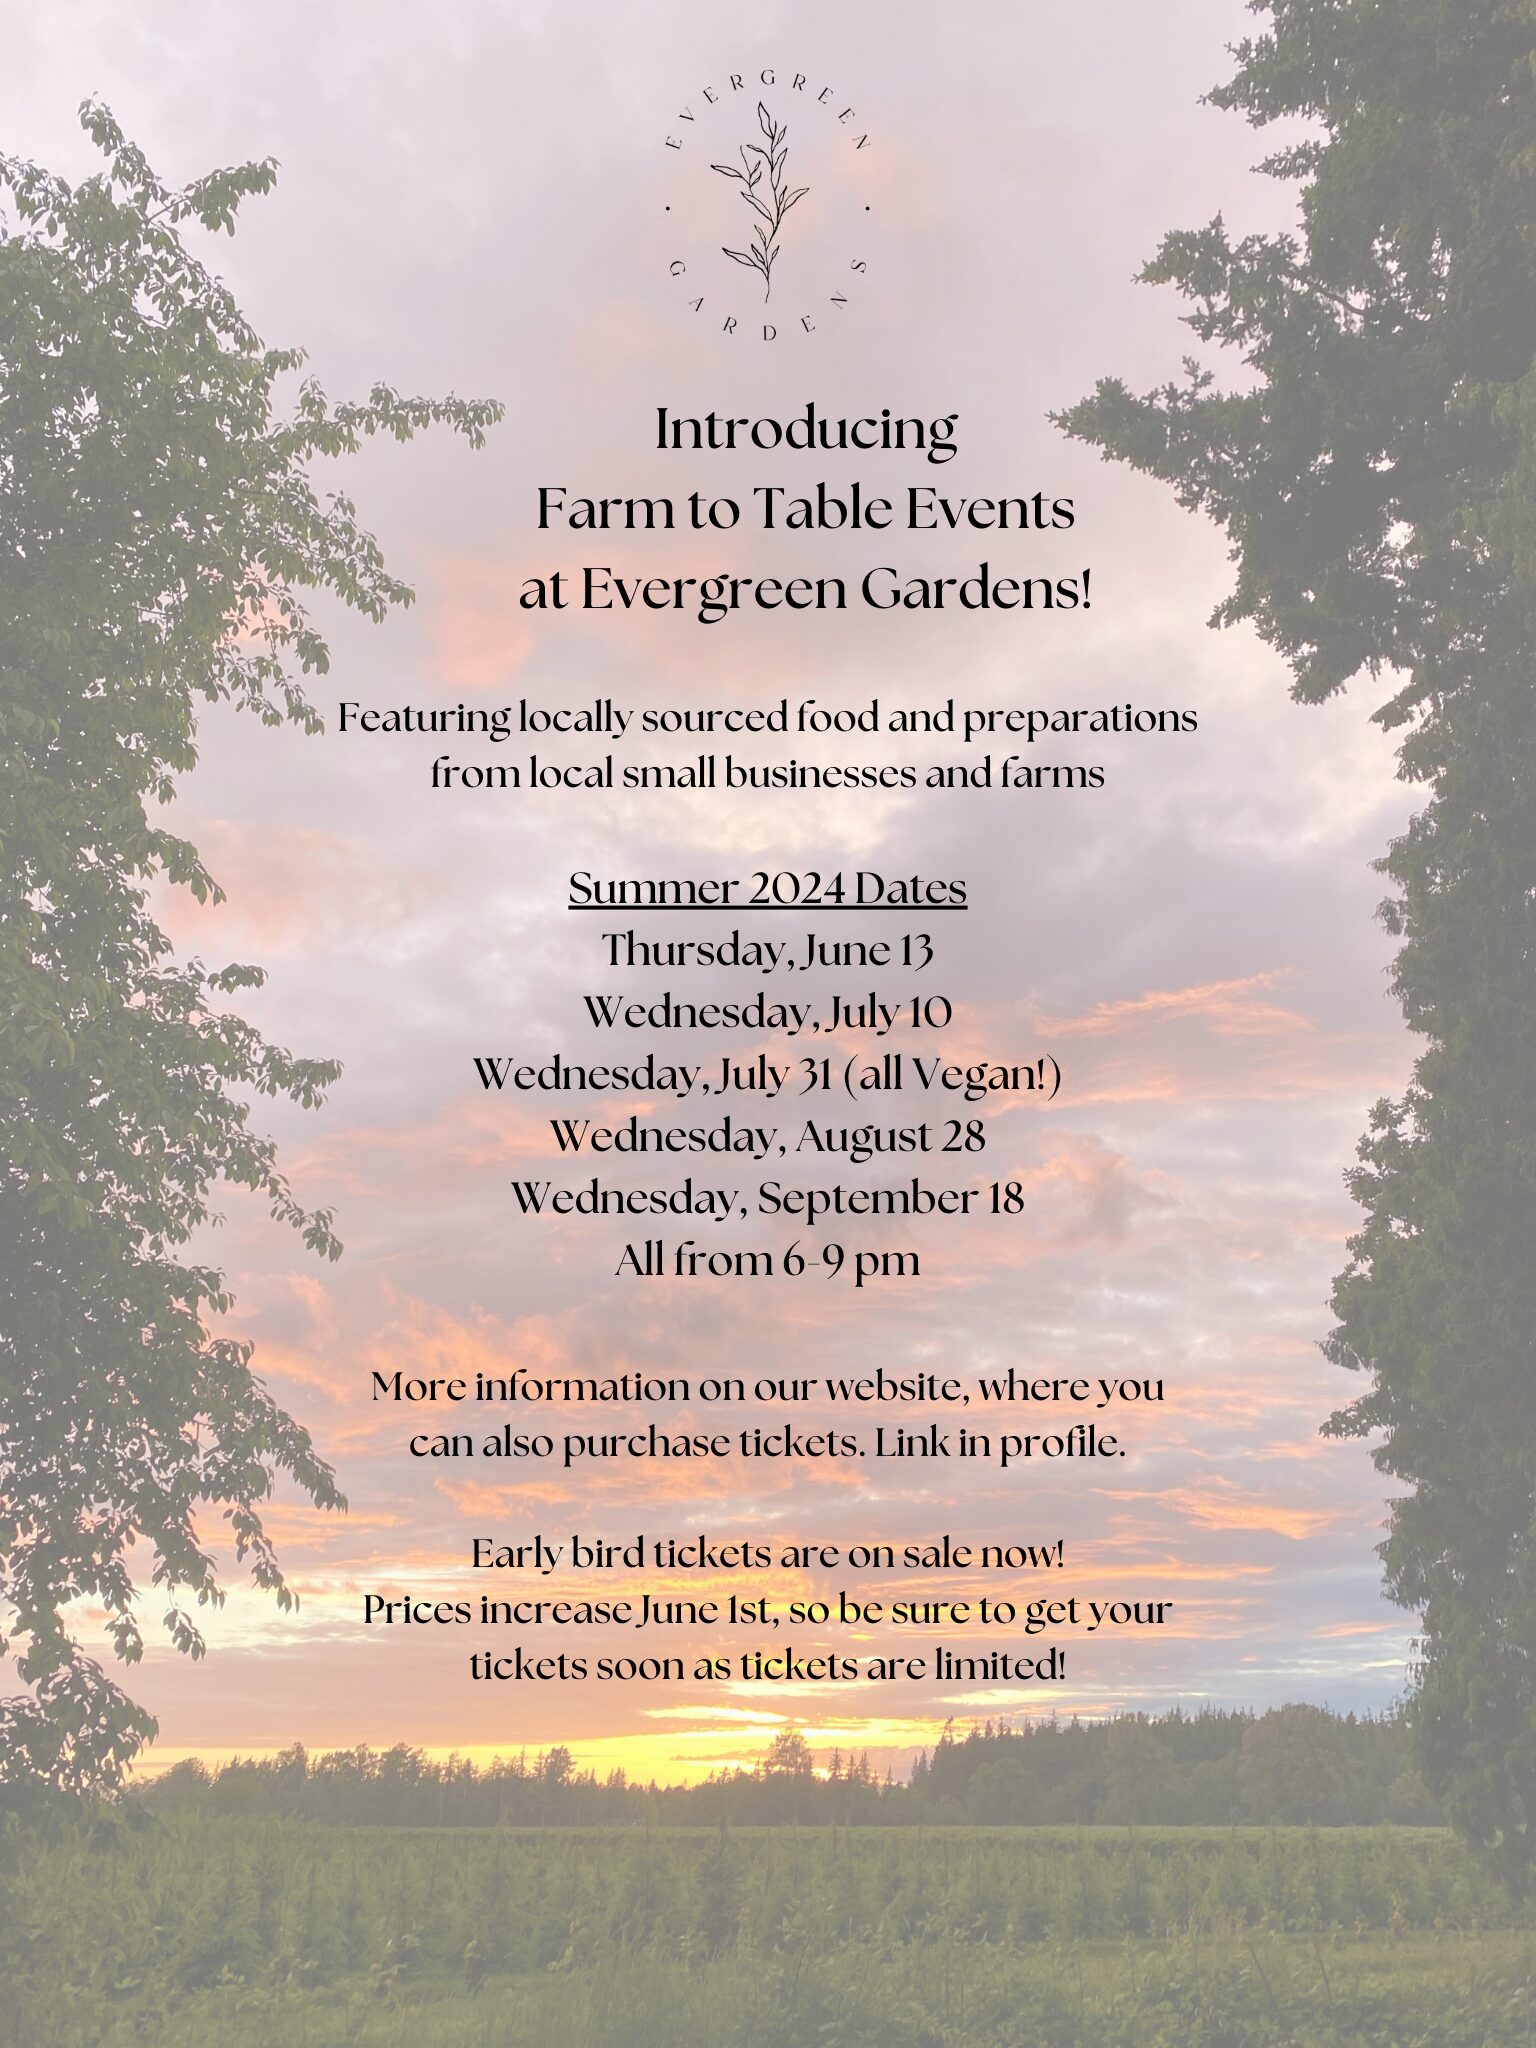 Image with text overlay, information about farm to table dinner at Evergreen Gardens